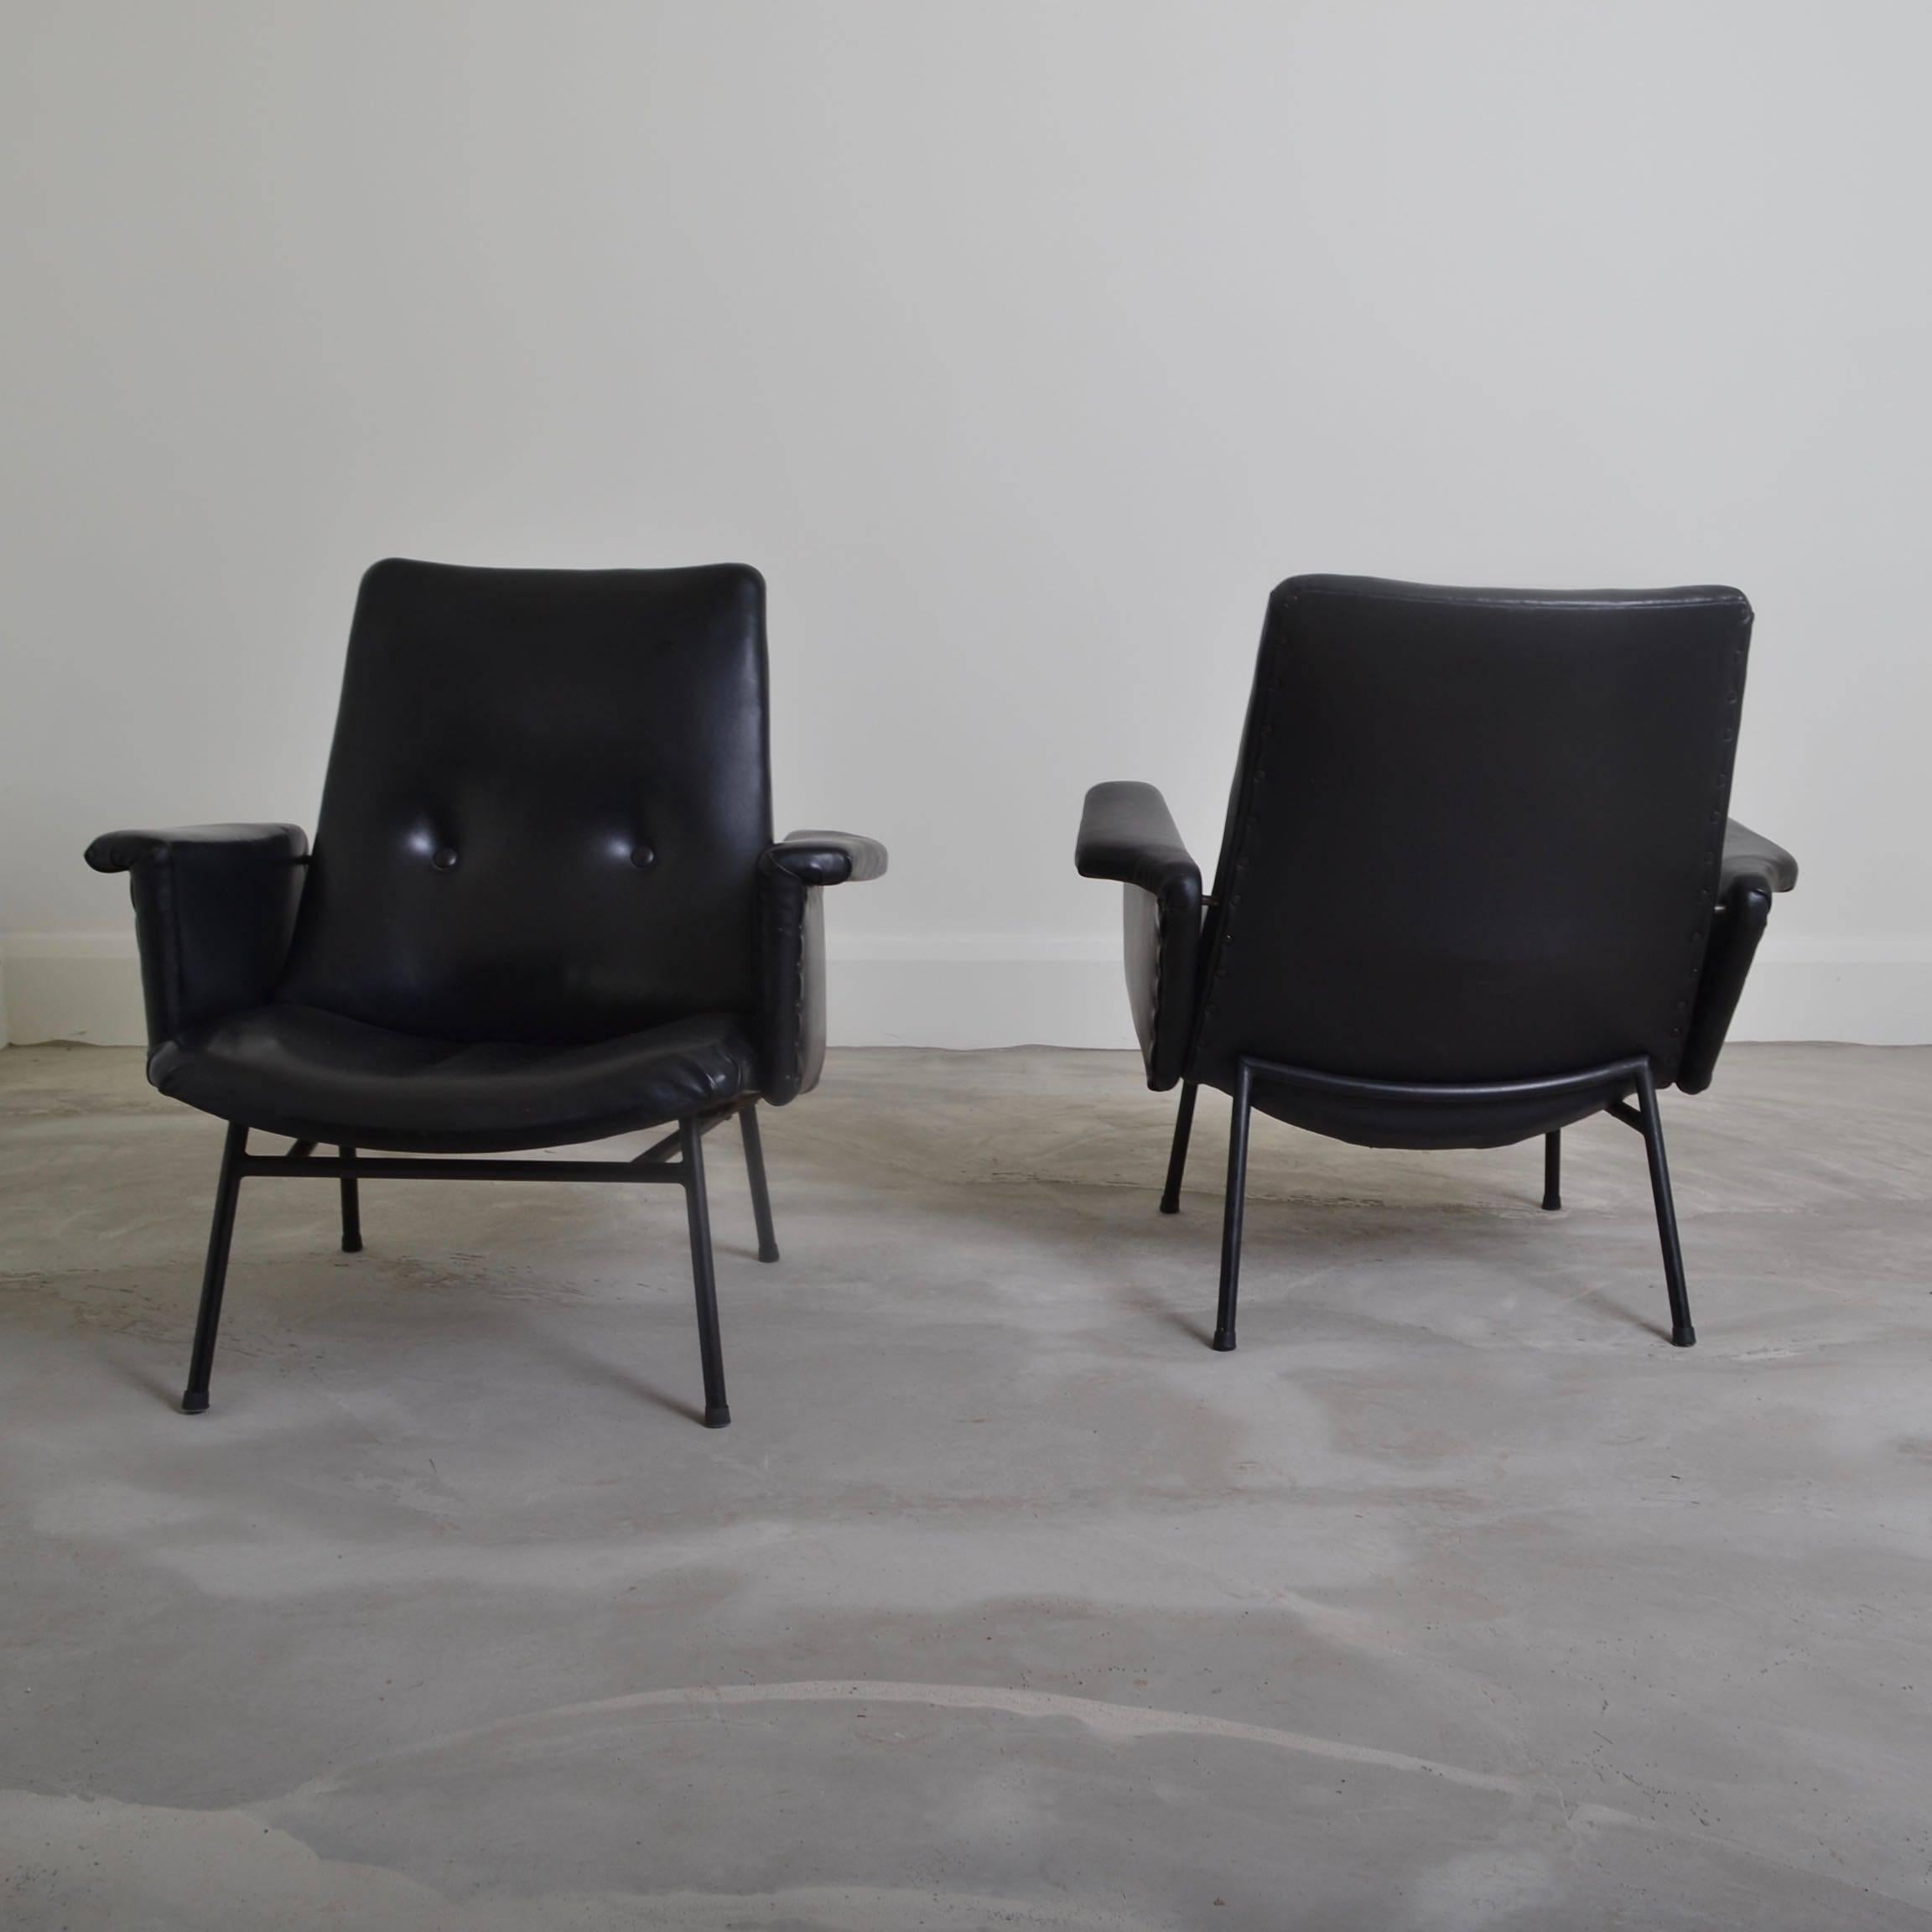 Pair of SK660 armchairs designed by Pierre Guariche and manufactured by Steiner,
France, circa 1950
Finished in original black vinyl would look very good re-upholstered.